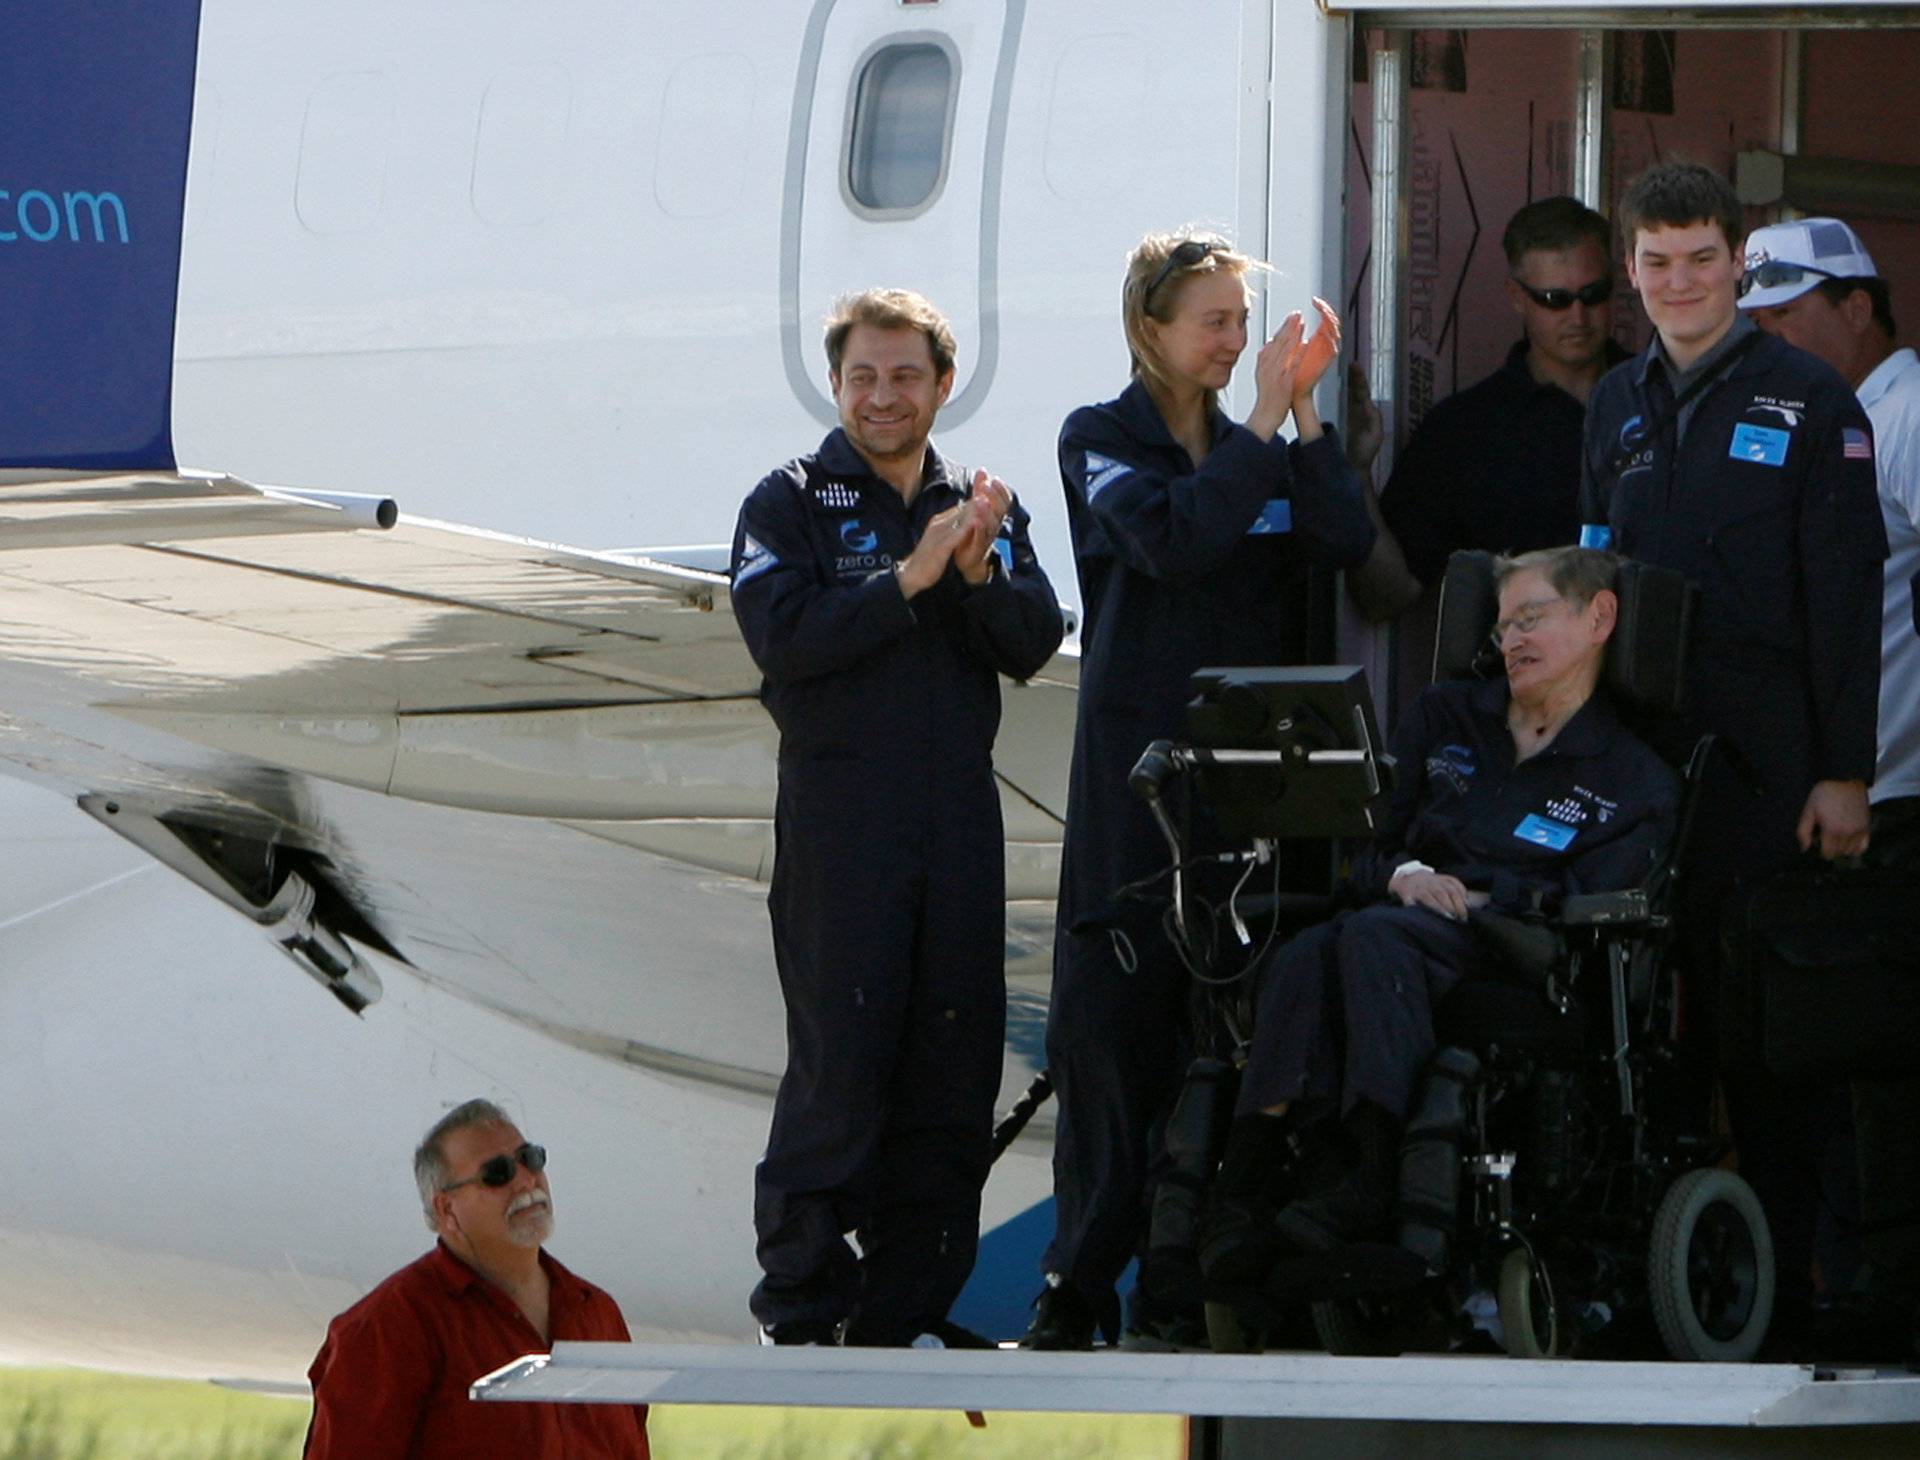 FILE PHOTO: CEO of ZERO-G Peter Diamandis (L) and crew with Professor Stephen Hawking, the world renowned physicist and expert on gravity on a lift truck after his flight at  Kennedy Space Center in Cape Canaveral, Florida